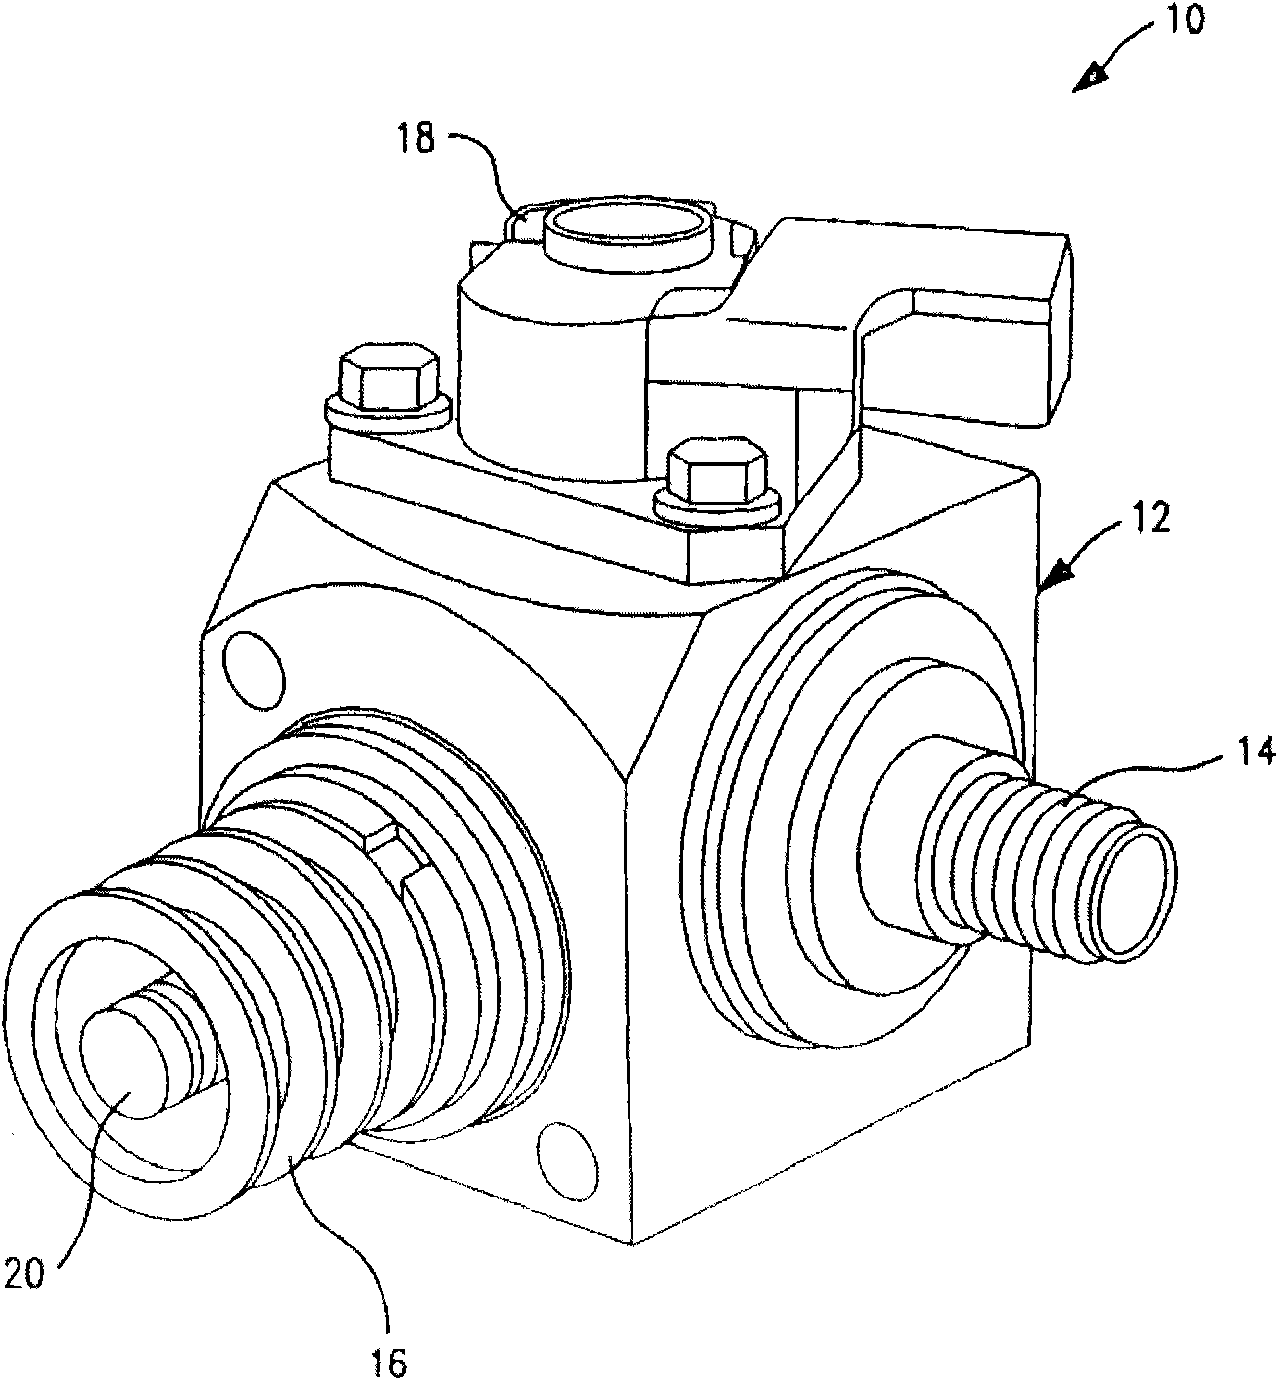 Load ring mounting of pumping plunger